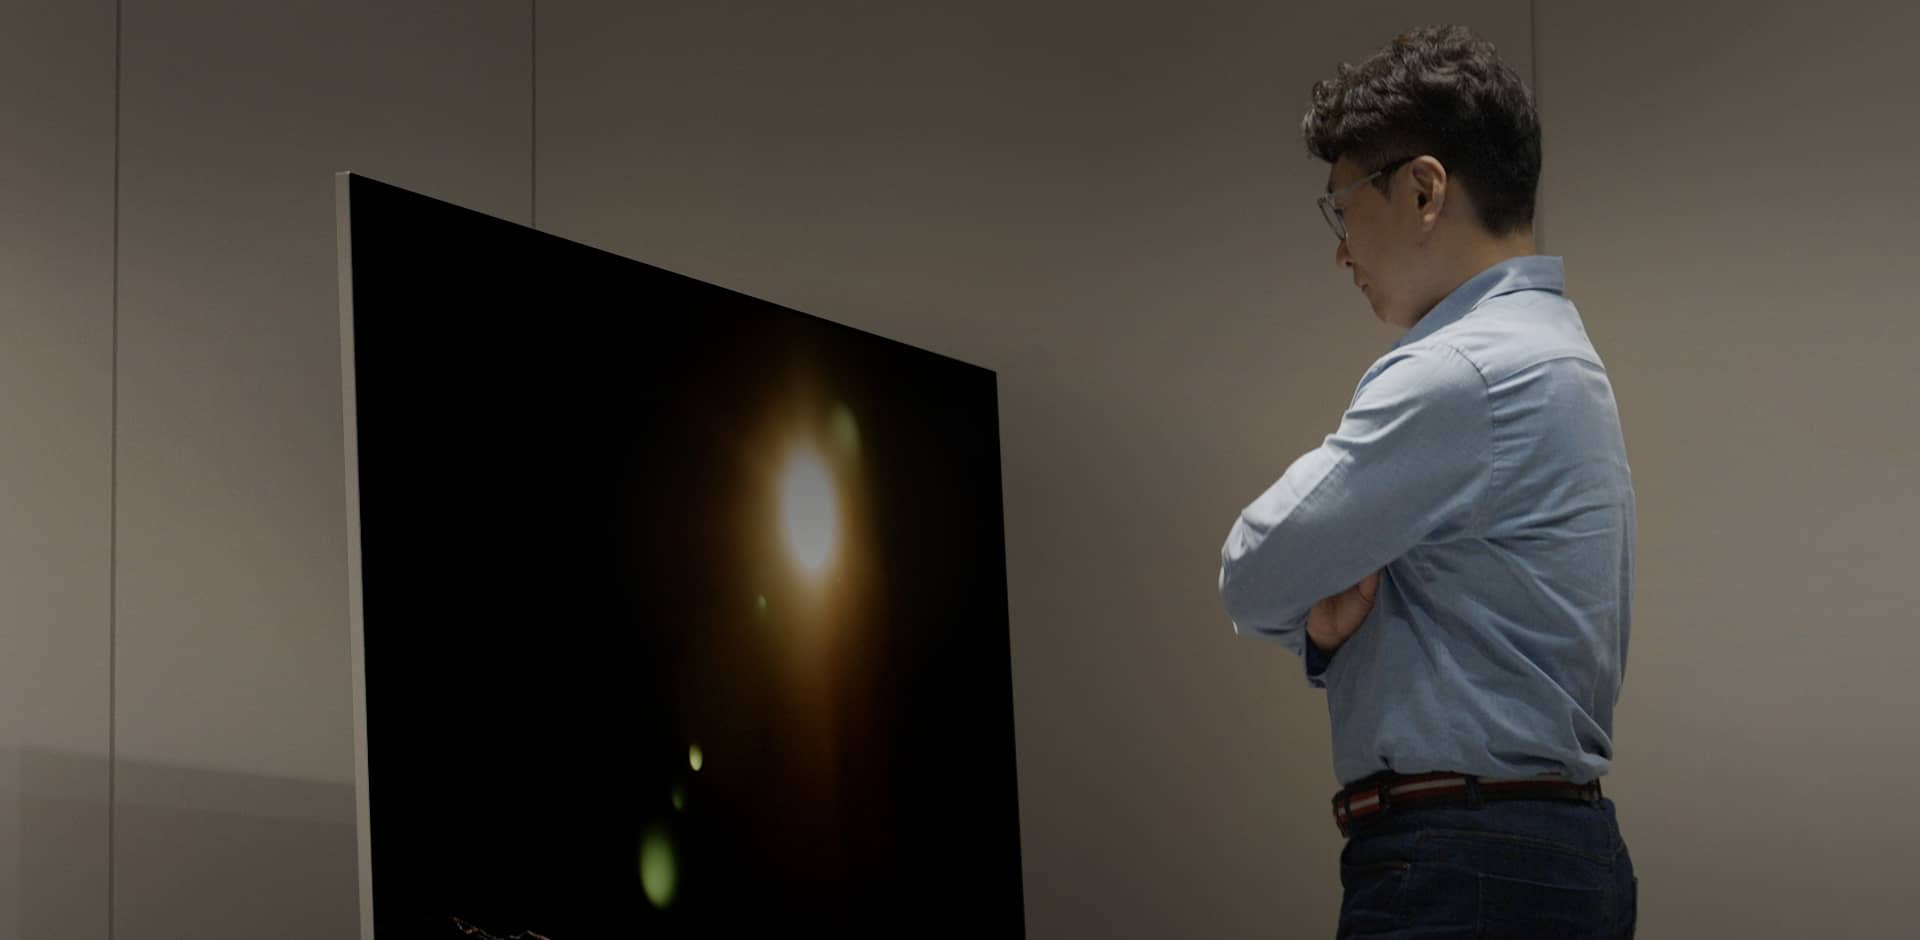  Dr. Yang is looking at the 3rd Genenration OLED META Technology display with his arms crossed. 